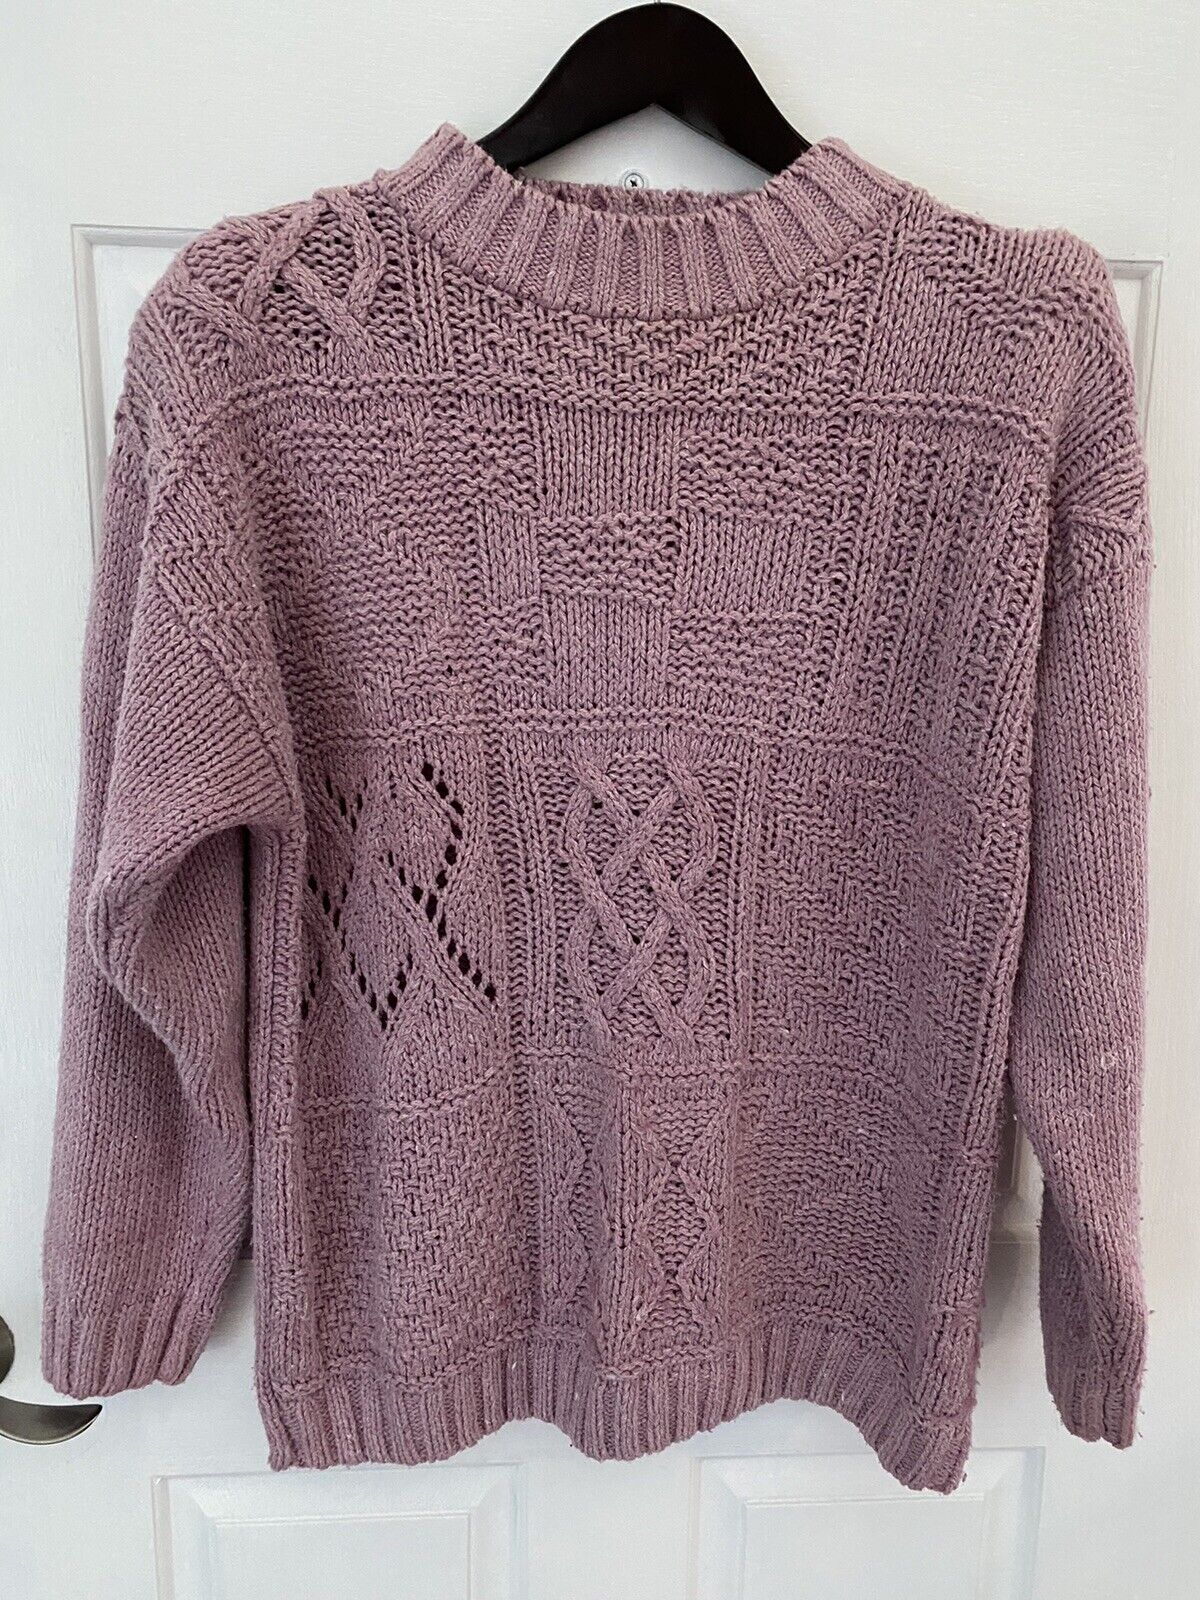 Vintage 80s Knitted Pink Soft Sweater - image 2